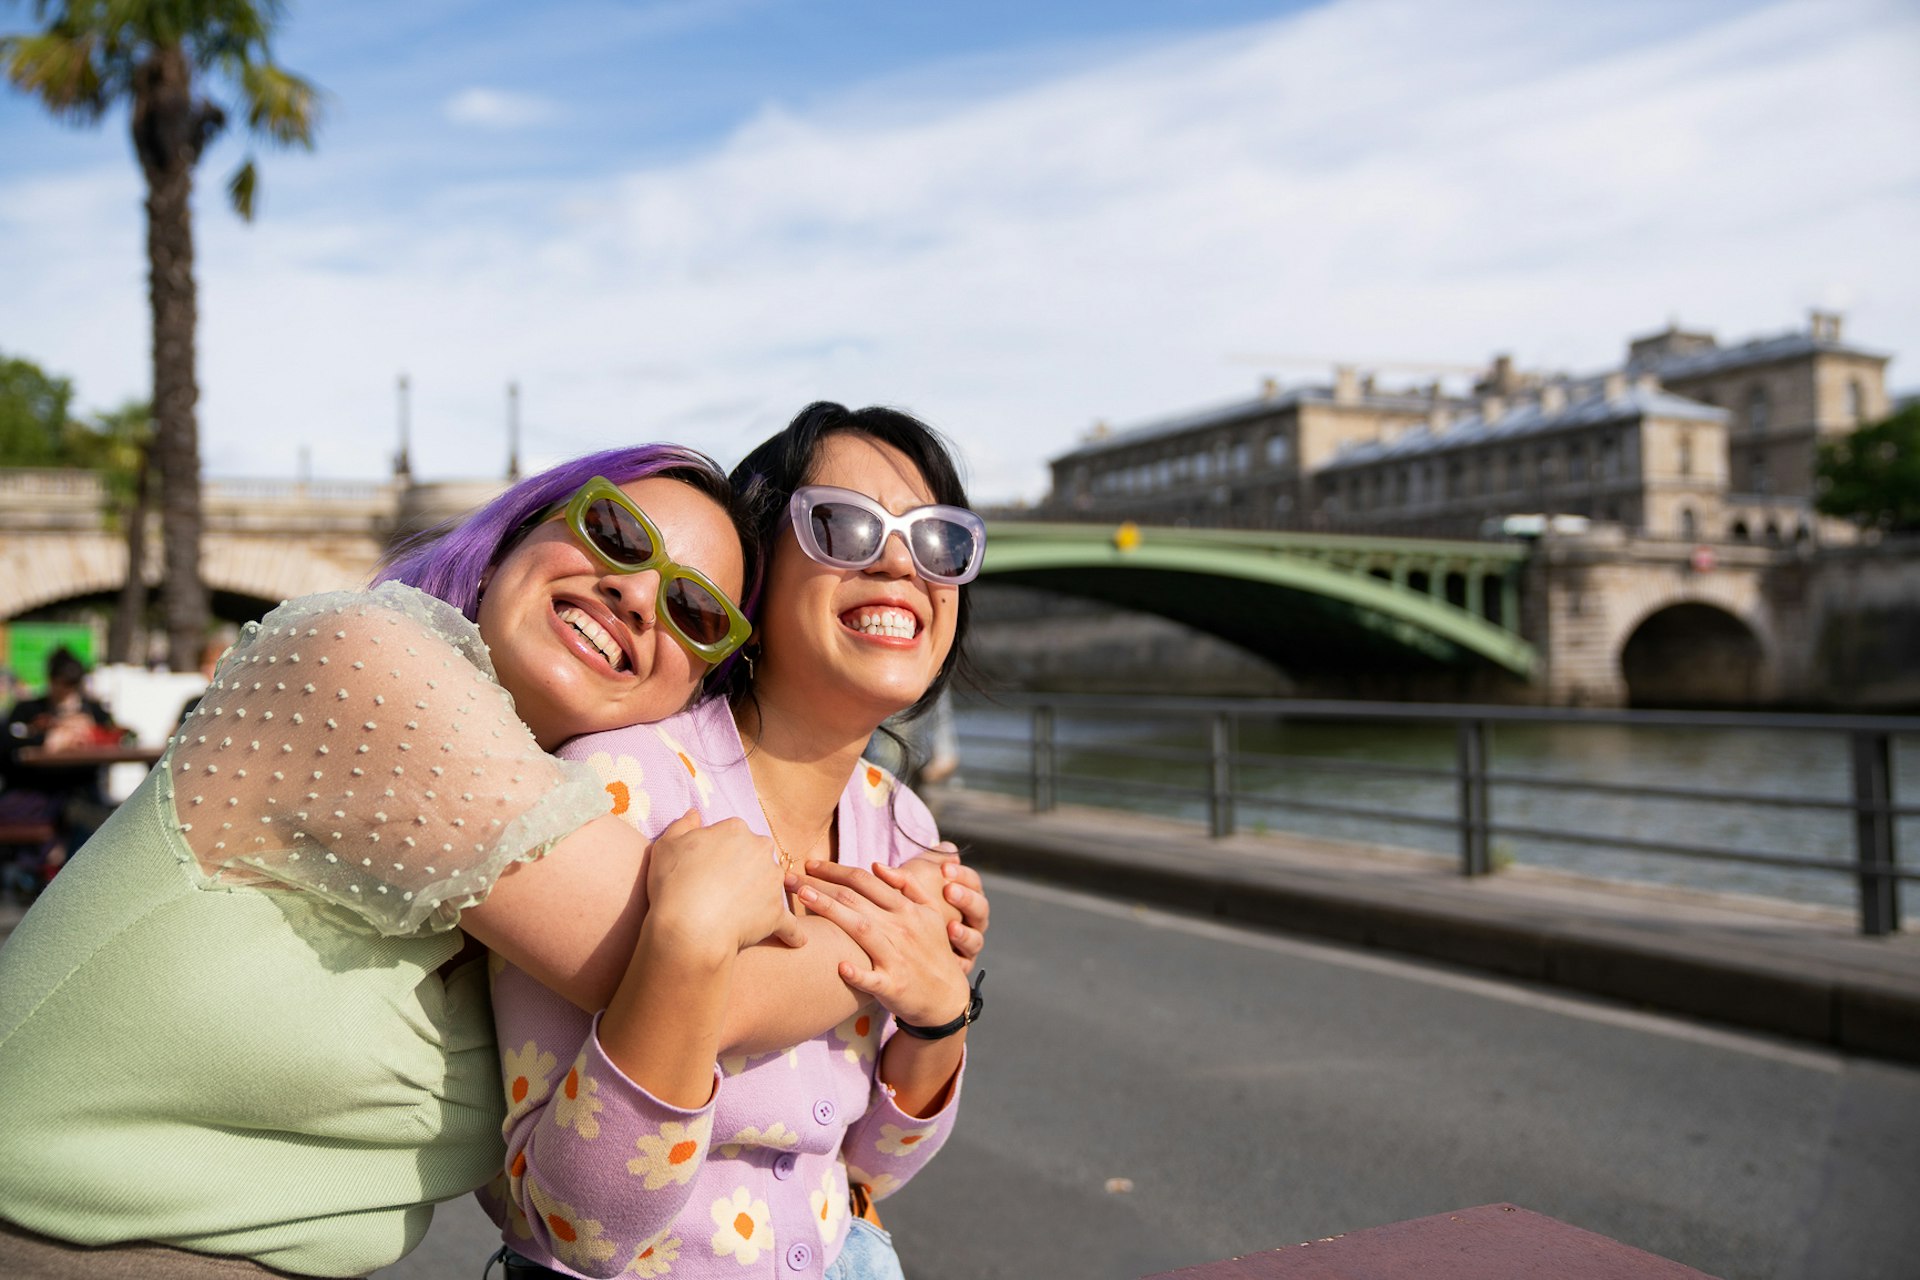 Cheerful friends smiling in Paris by the River Seine